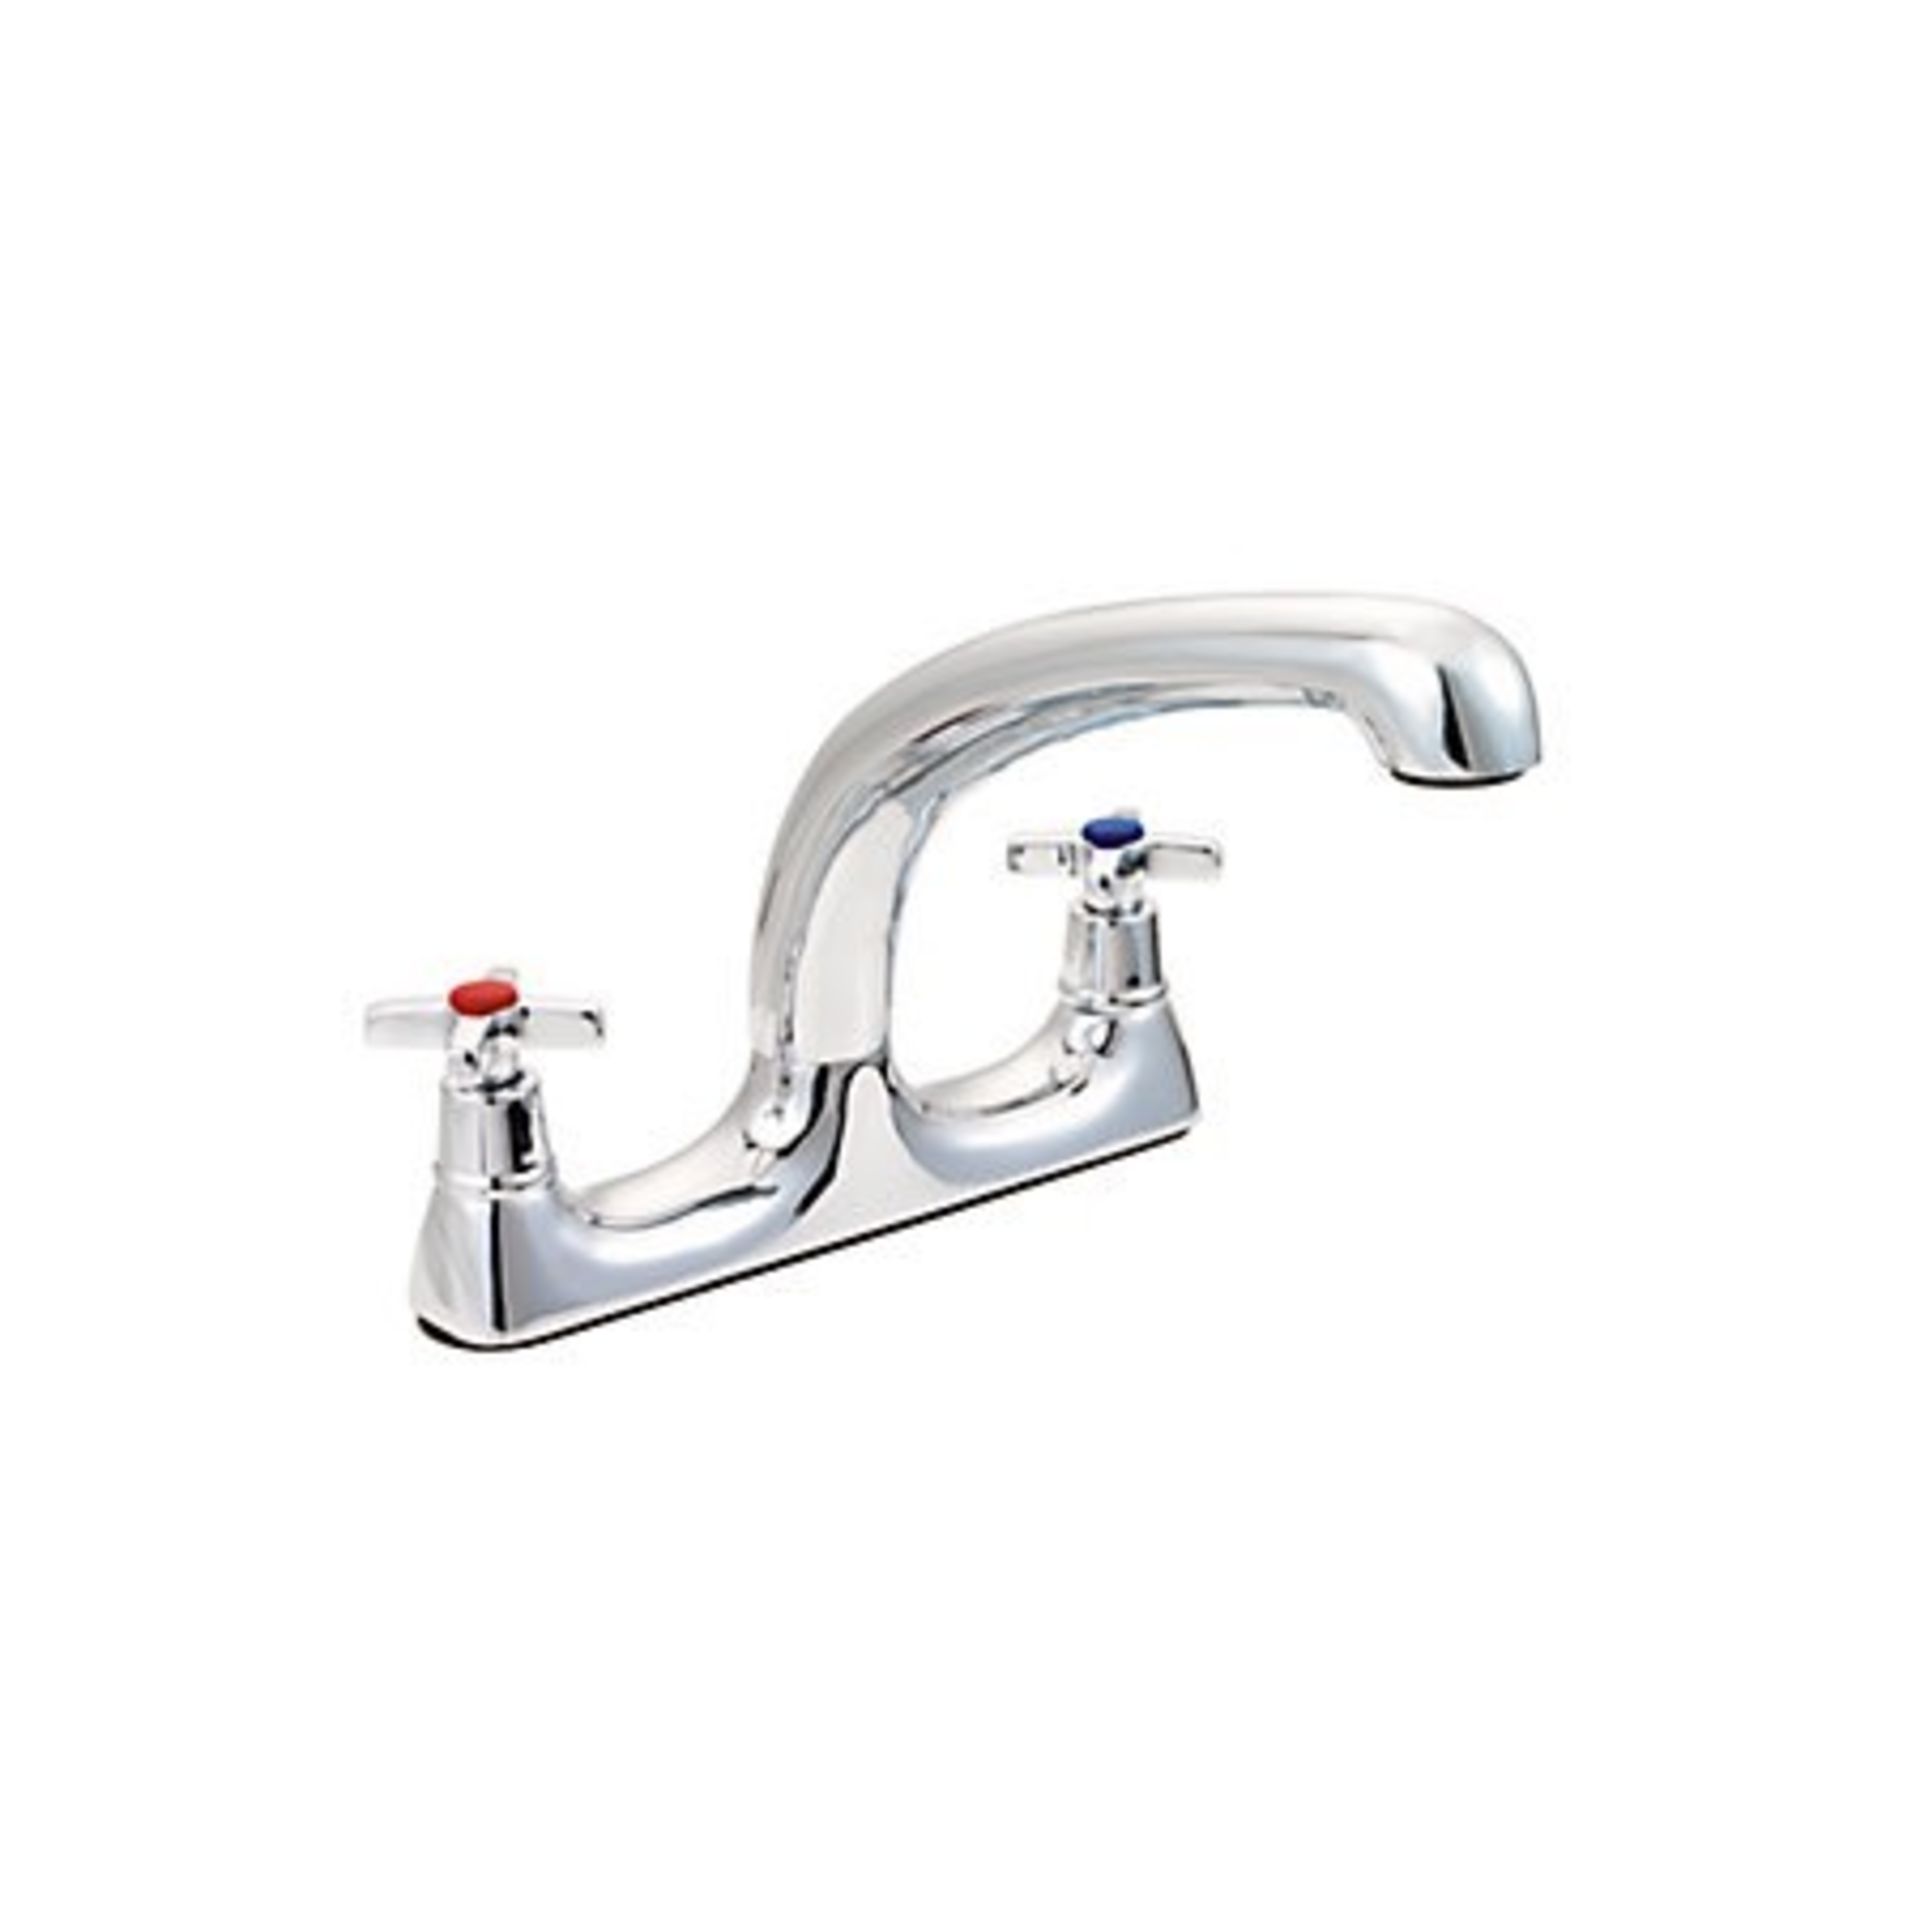 63 - Madrid Chrome Finish Deck Mixer. This chrome effect deck mixer tap from the Madrid range brings